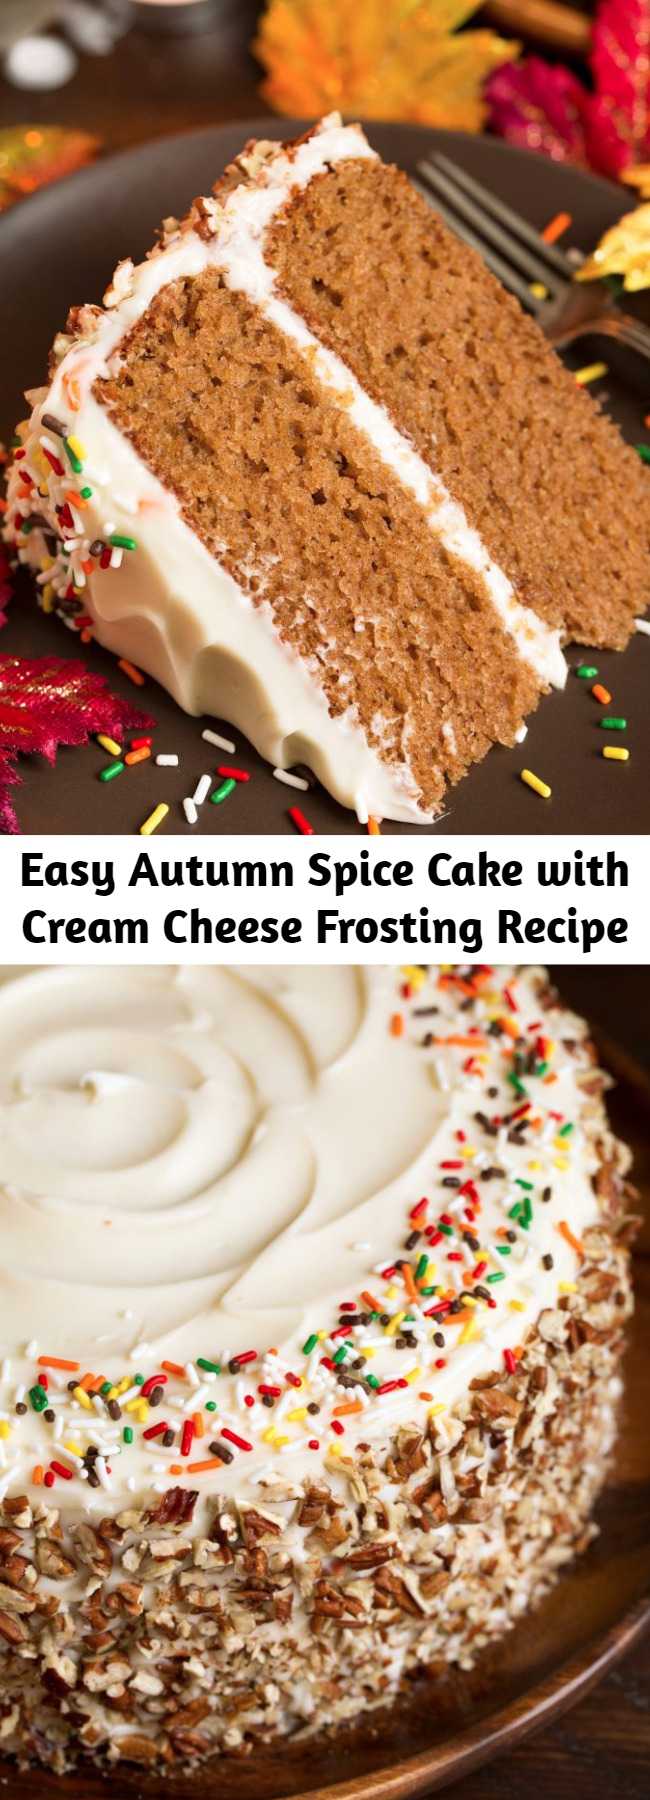 Easy Autumn Spice Cake with Cream Cheese Frosting Recipe - This is one of my all time favorite fall cakes! It's perfectly moist and brimming with lots of those sweet autumn spices. It has a tender crumb and so much flavor in every bite. No one can resist a slice!